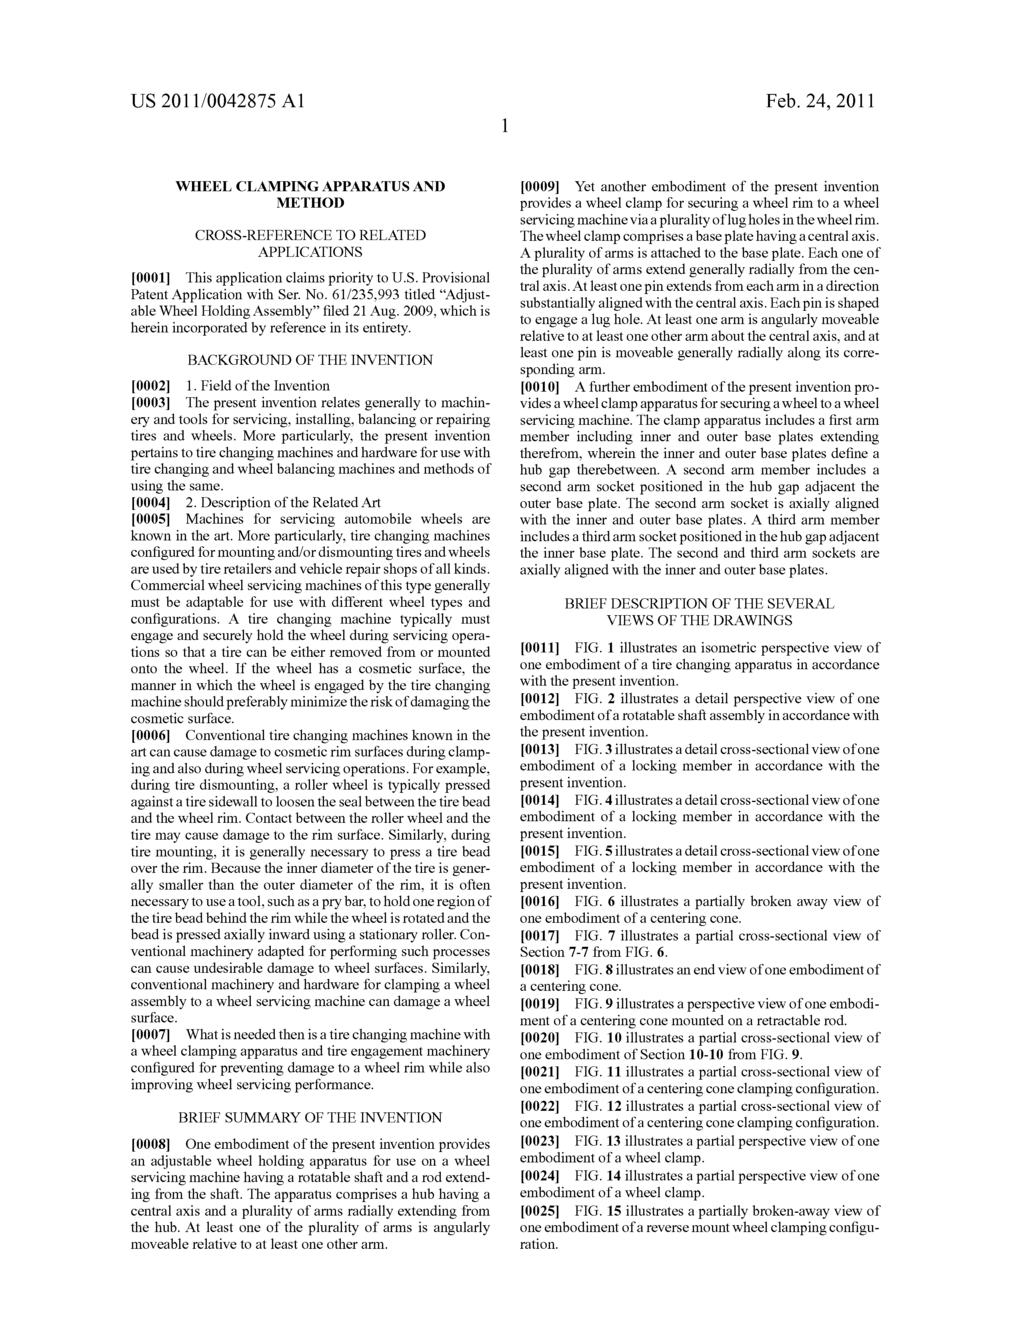 US 2011/0042875 A1 Feb. 24, 2011 WHEEL CLAMPINGAPPARATUS AND METHOD CROSS-REFERENCE TO RELATED APPLICATIONS 0001. This application claims priority to U.S. Provisional Patent Application with Ser. No.